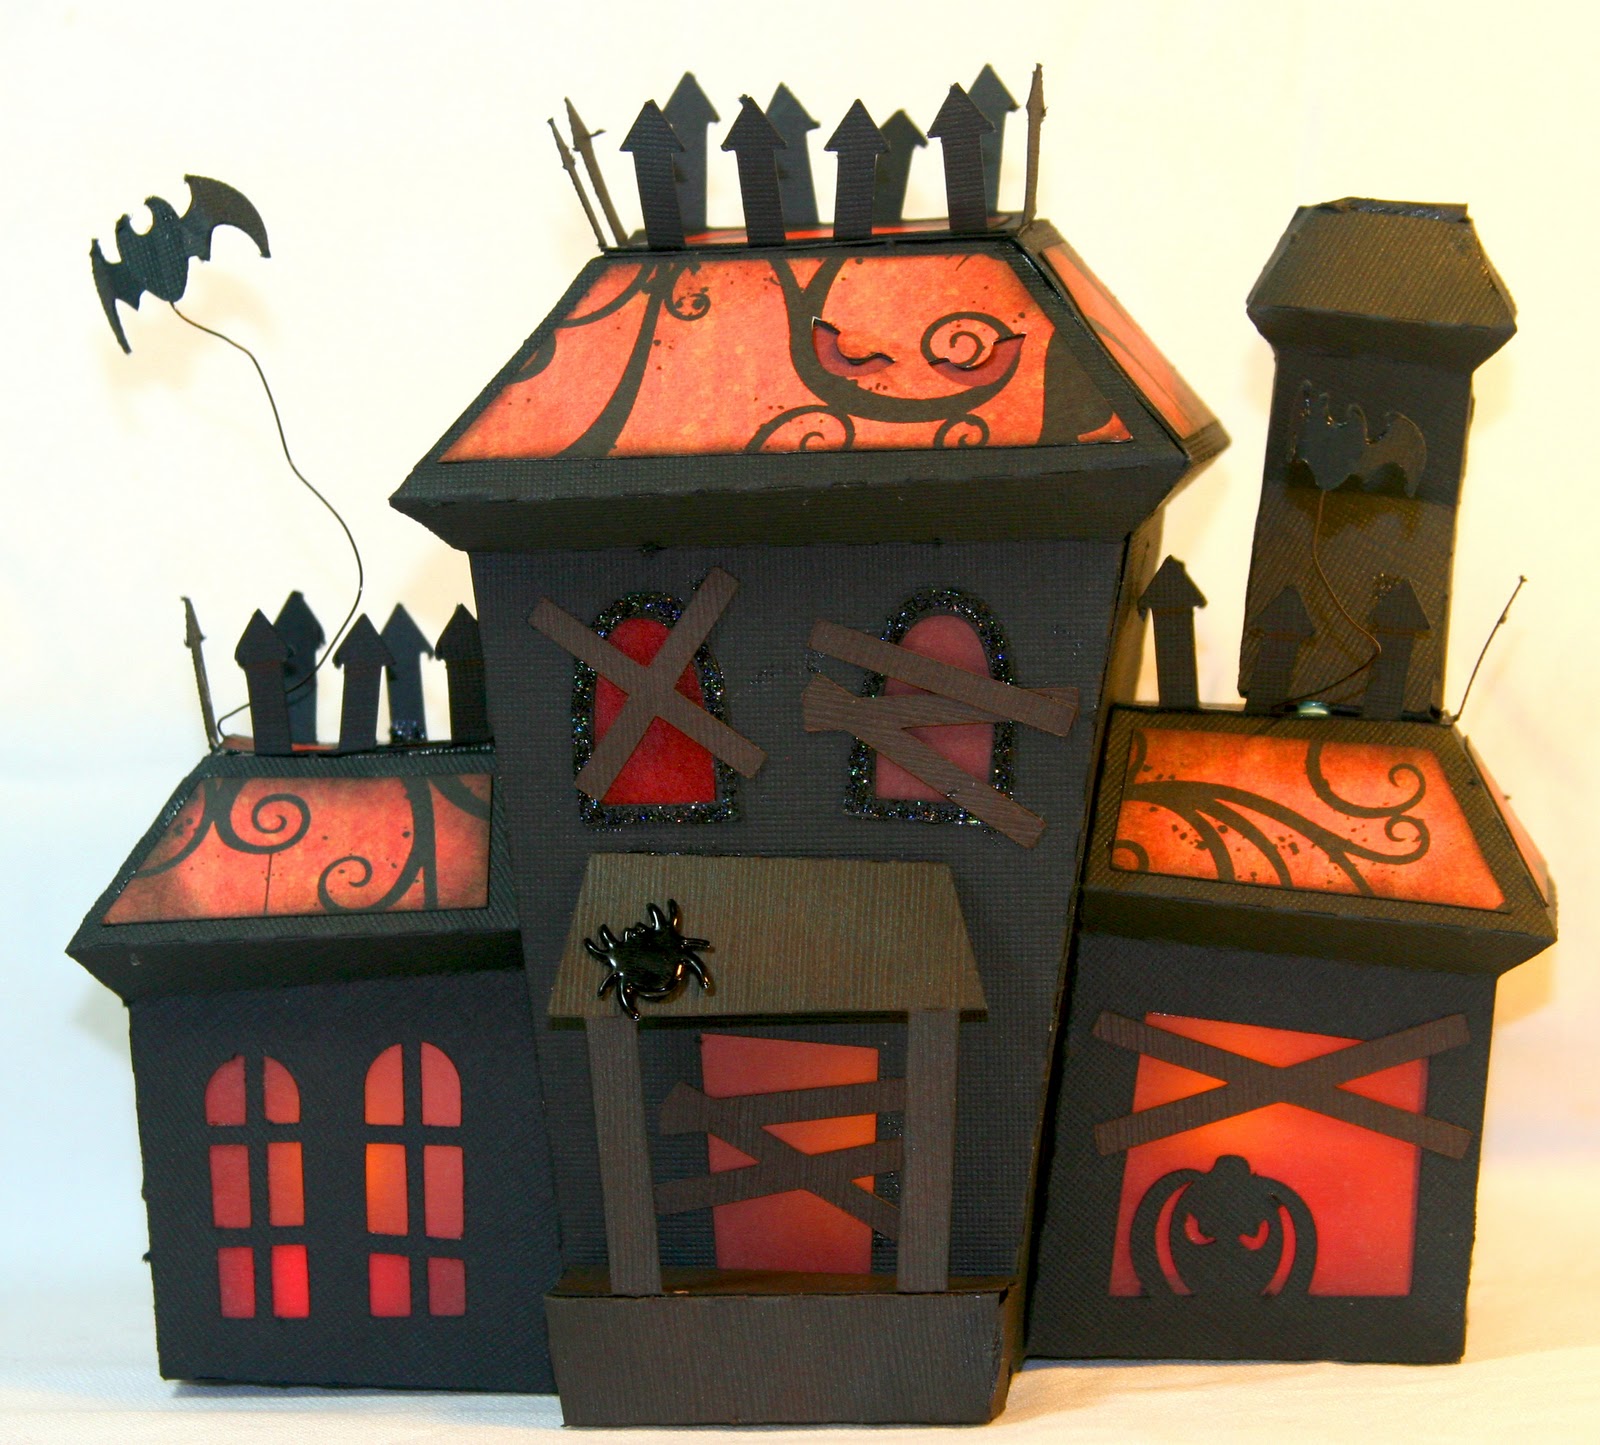 Download OBX Stamping & Crafting: SVGcuts.com 3D Haunted House